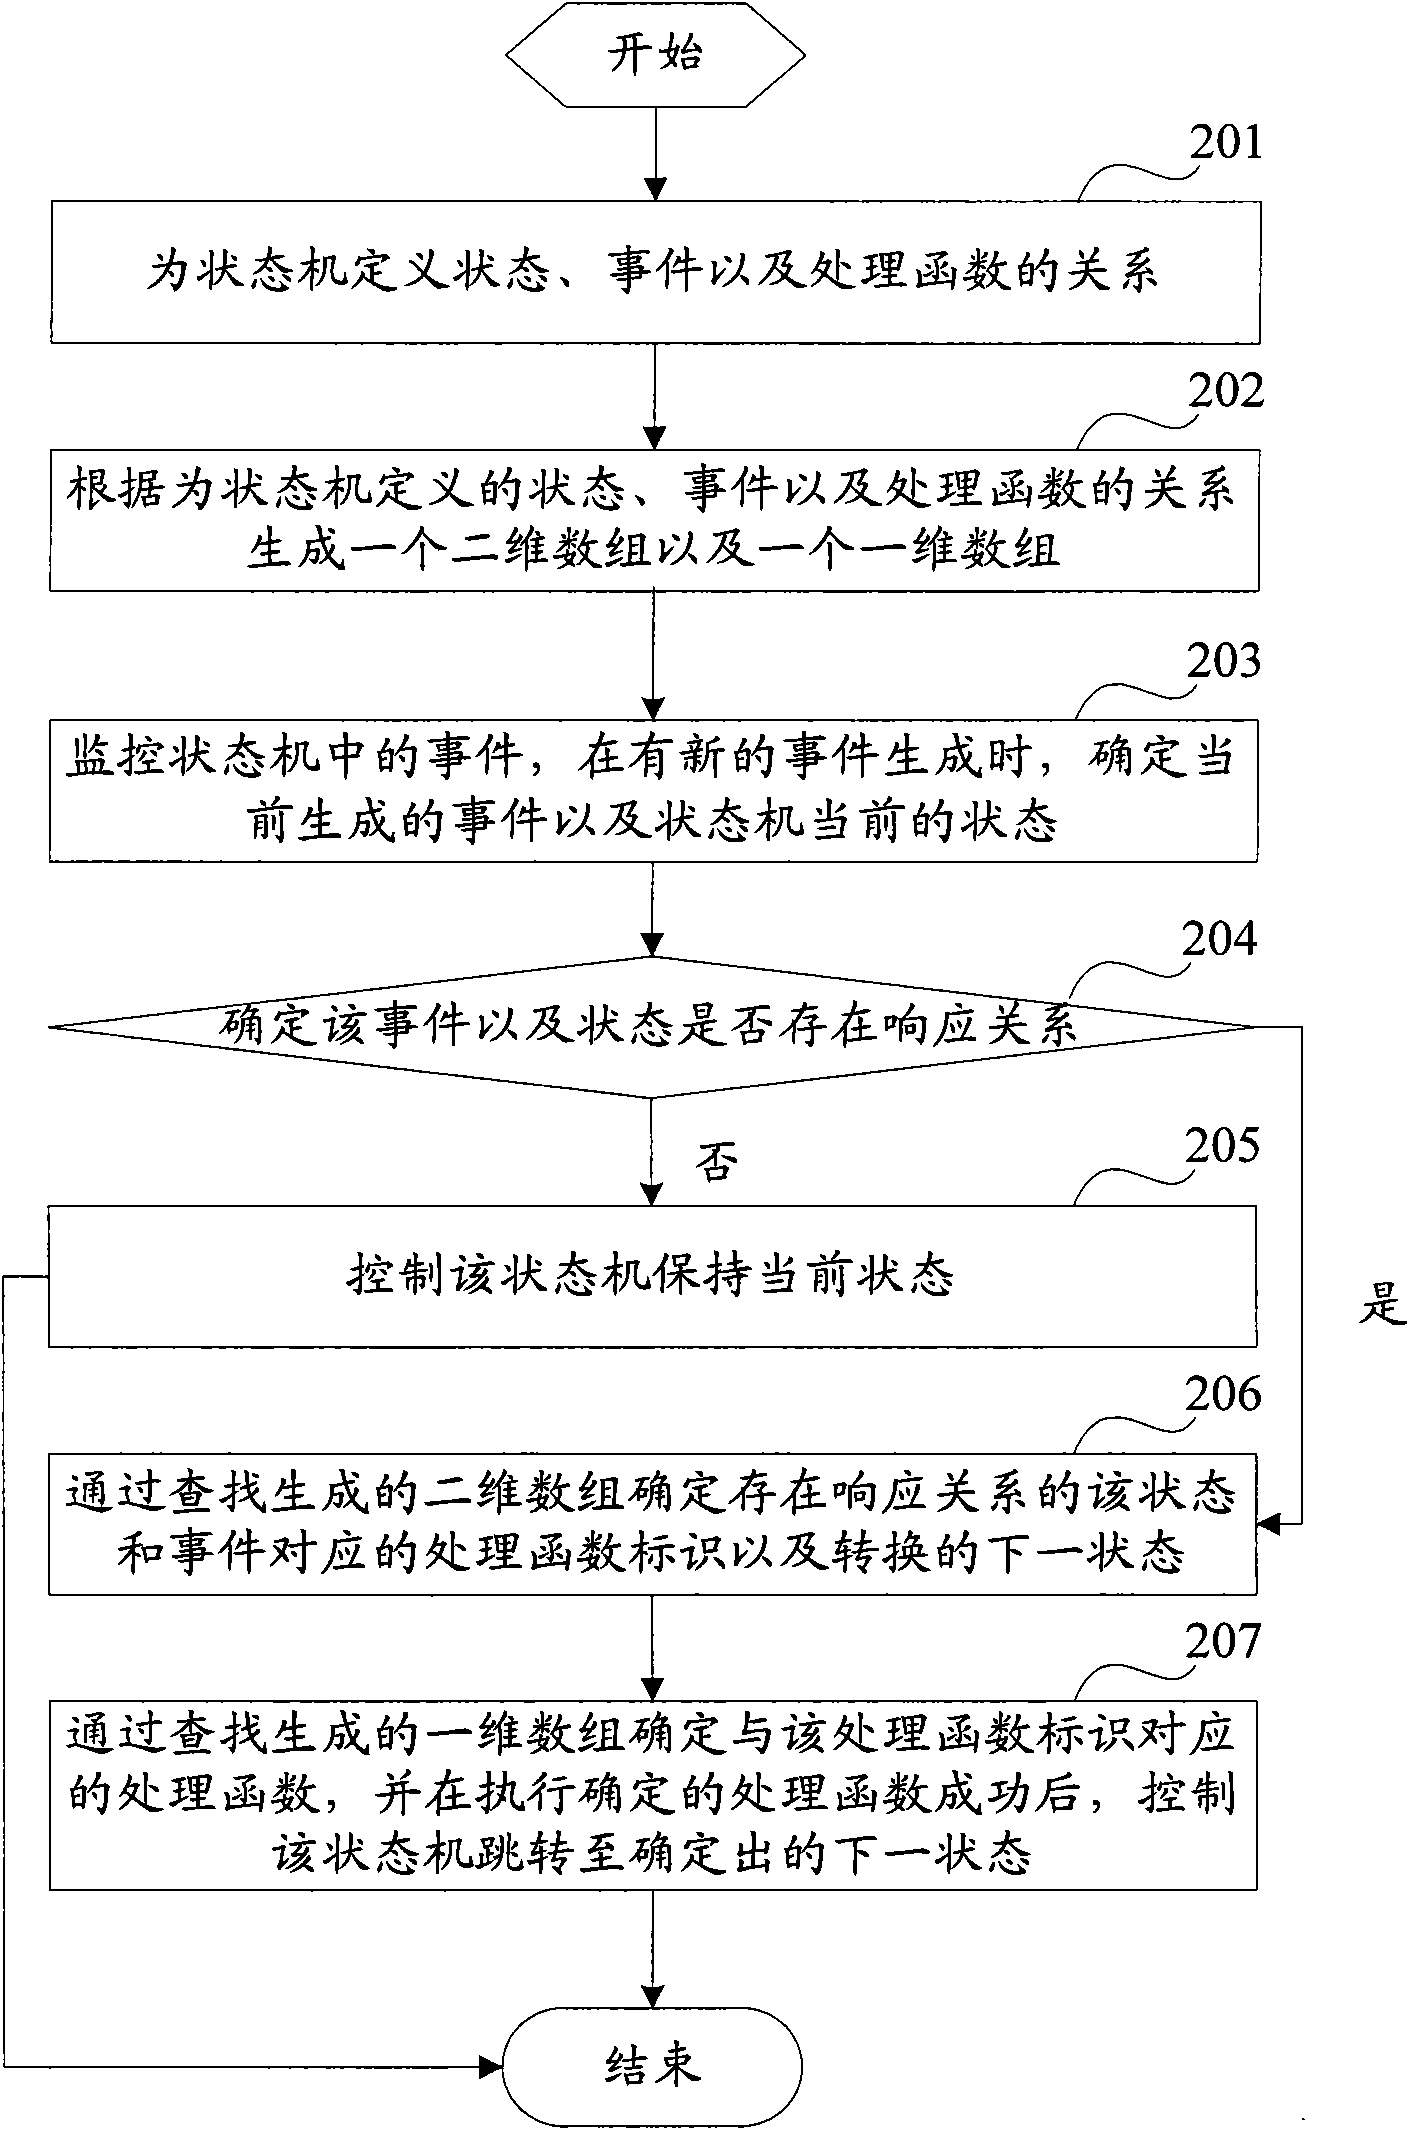 Method and device for realizing state machine